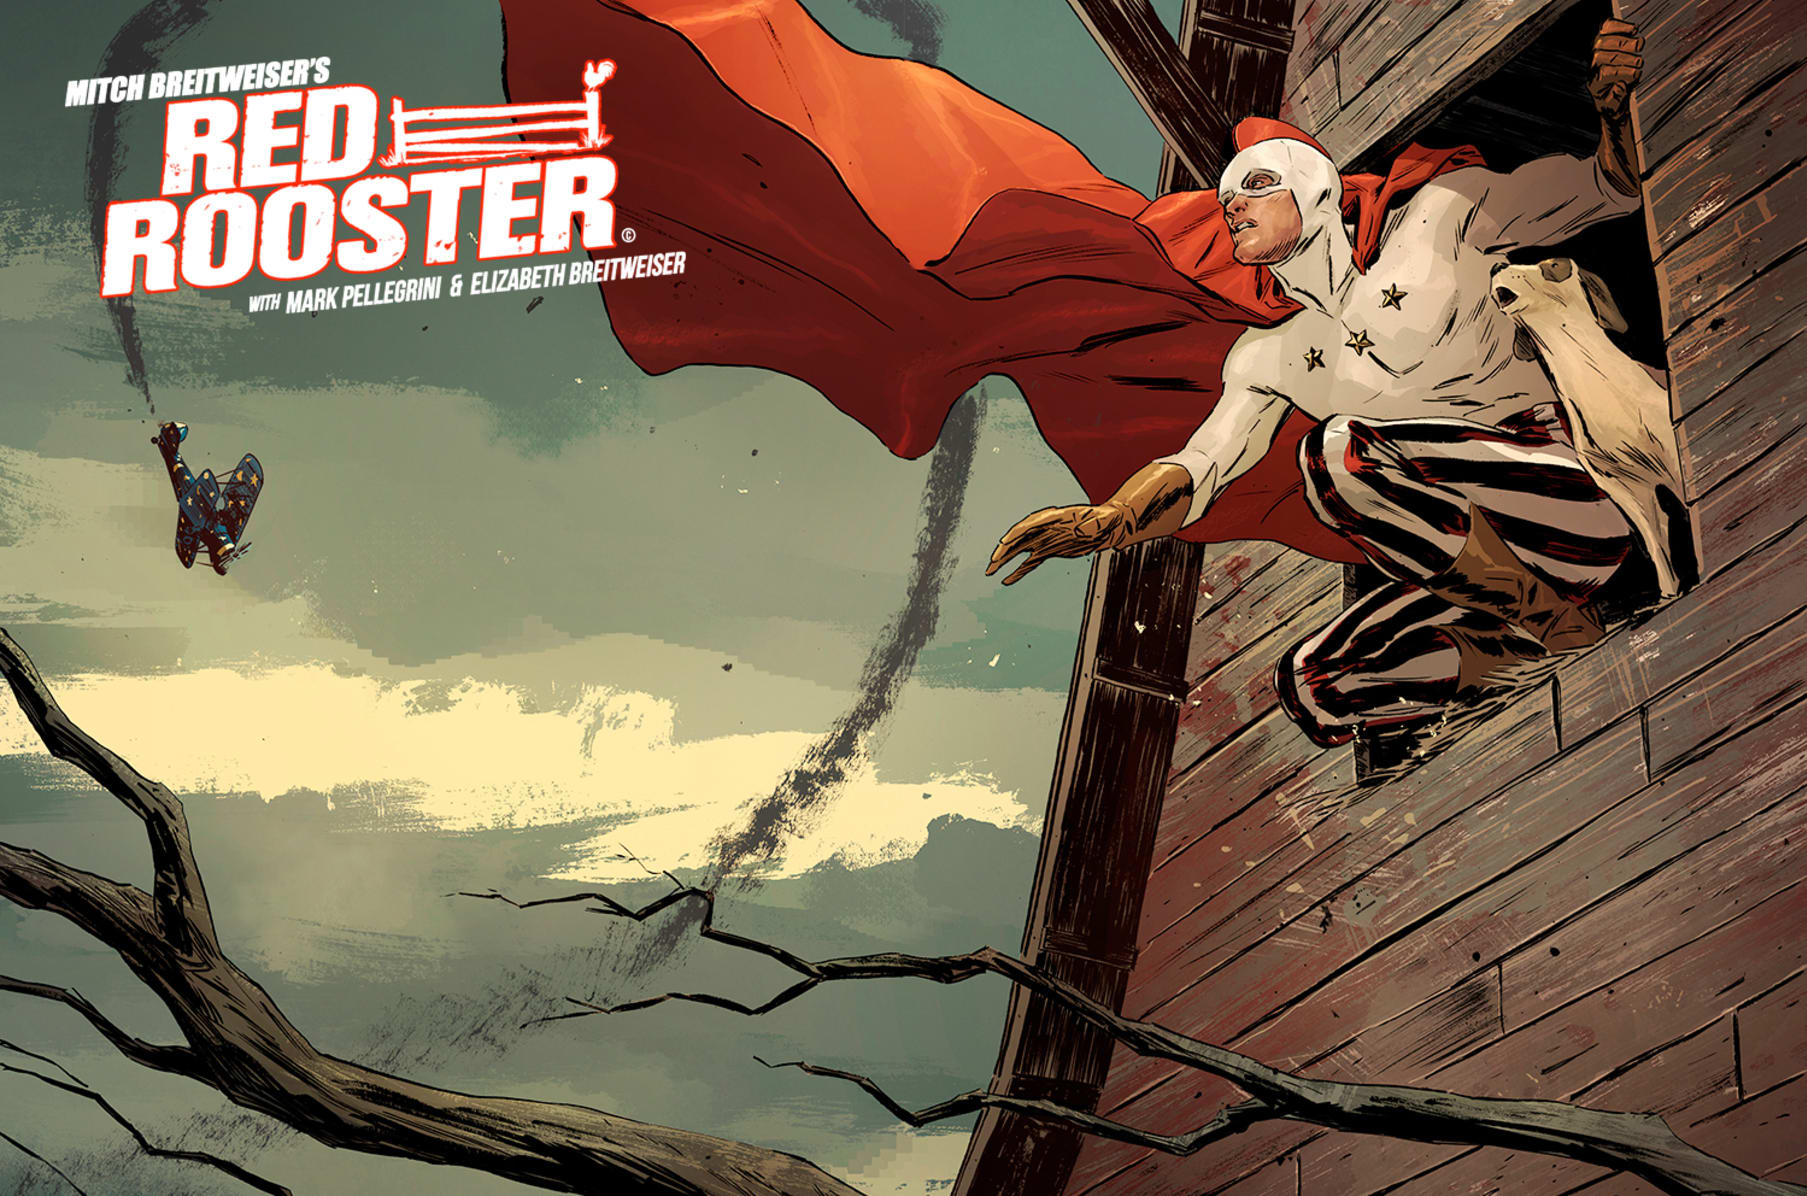 RED ROOSTER: Golden Age |